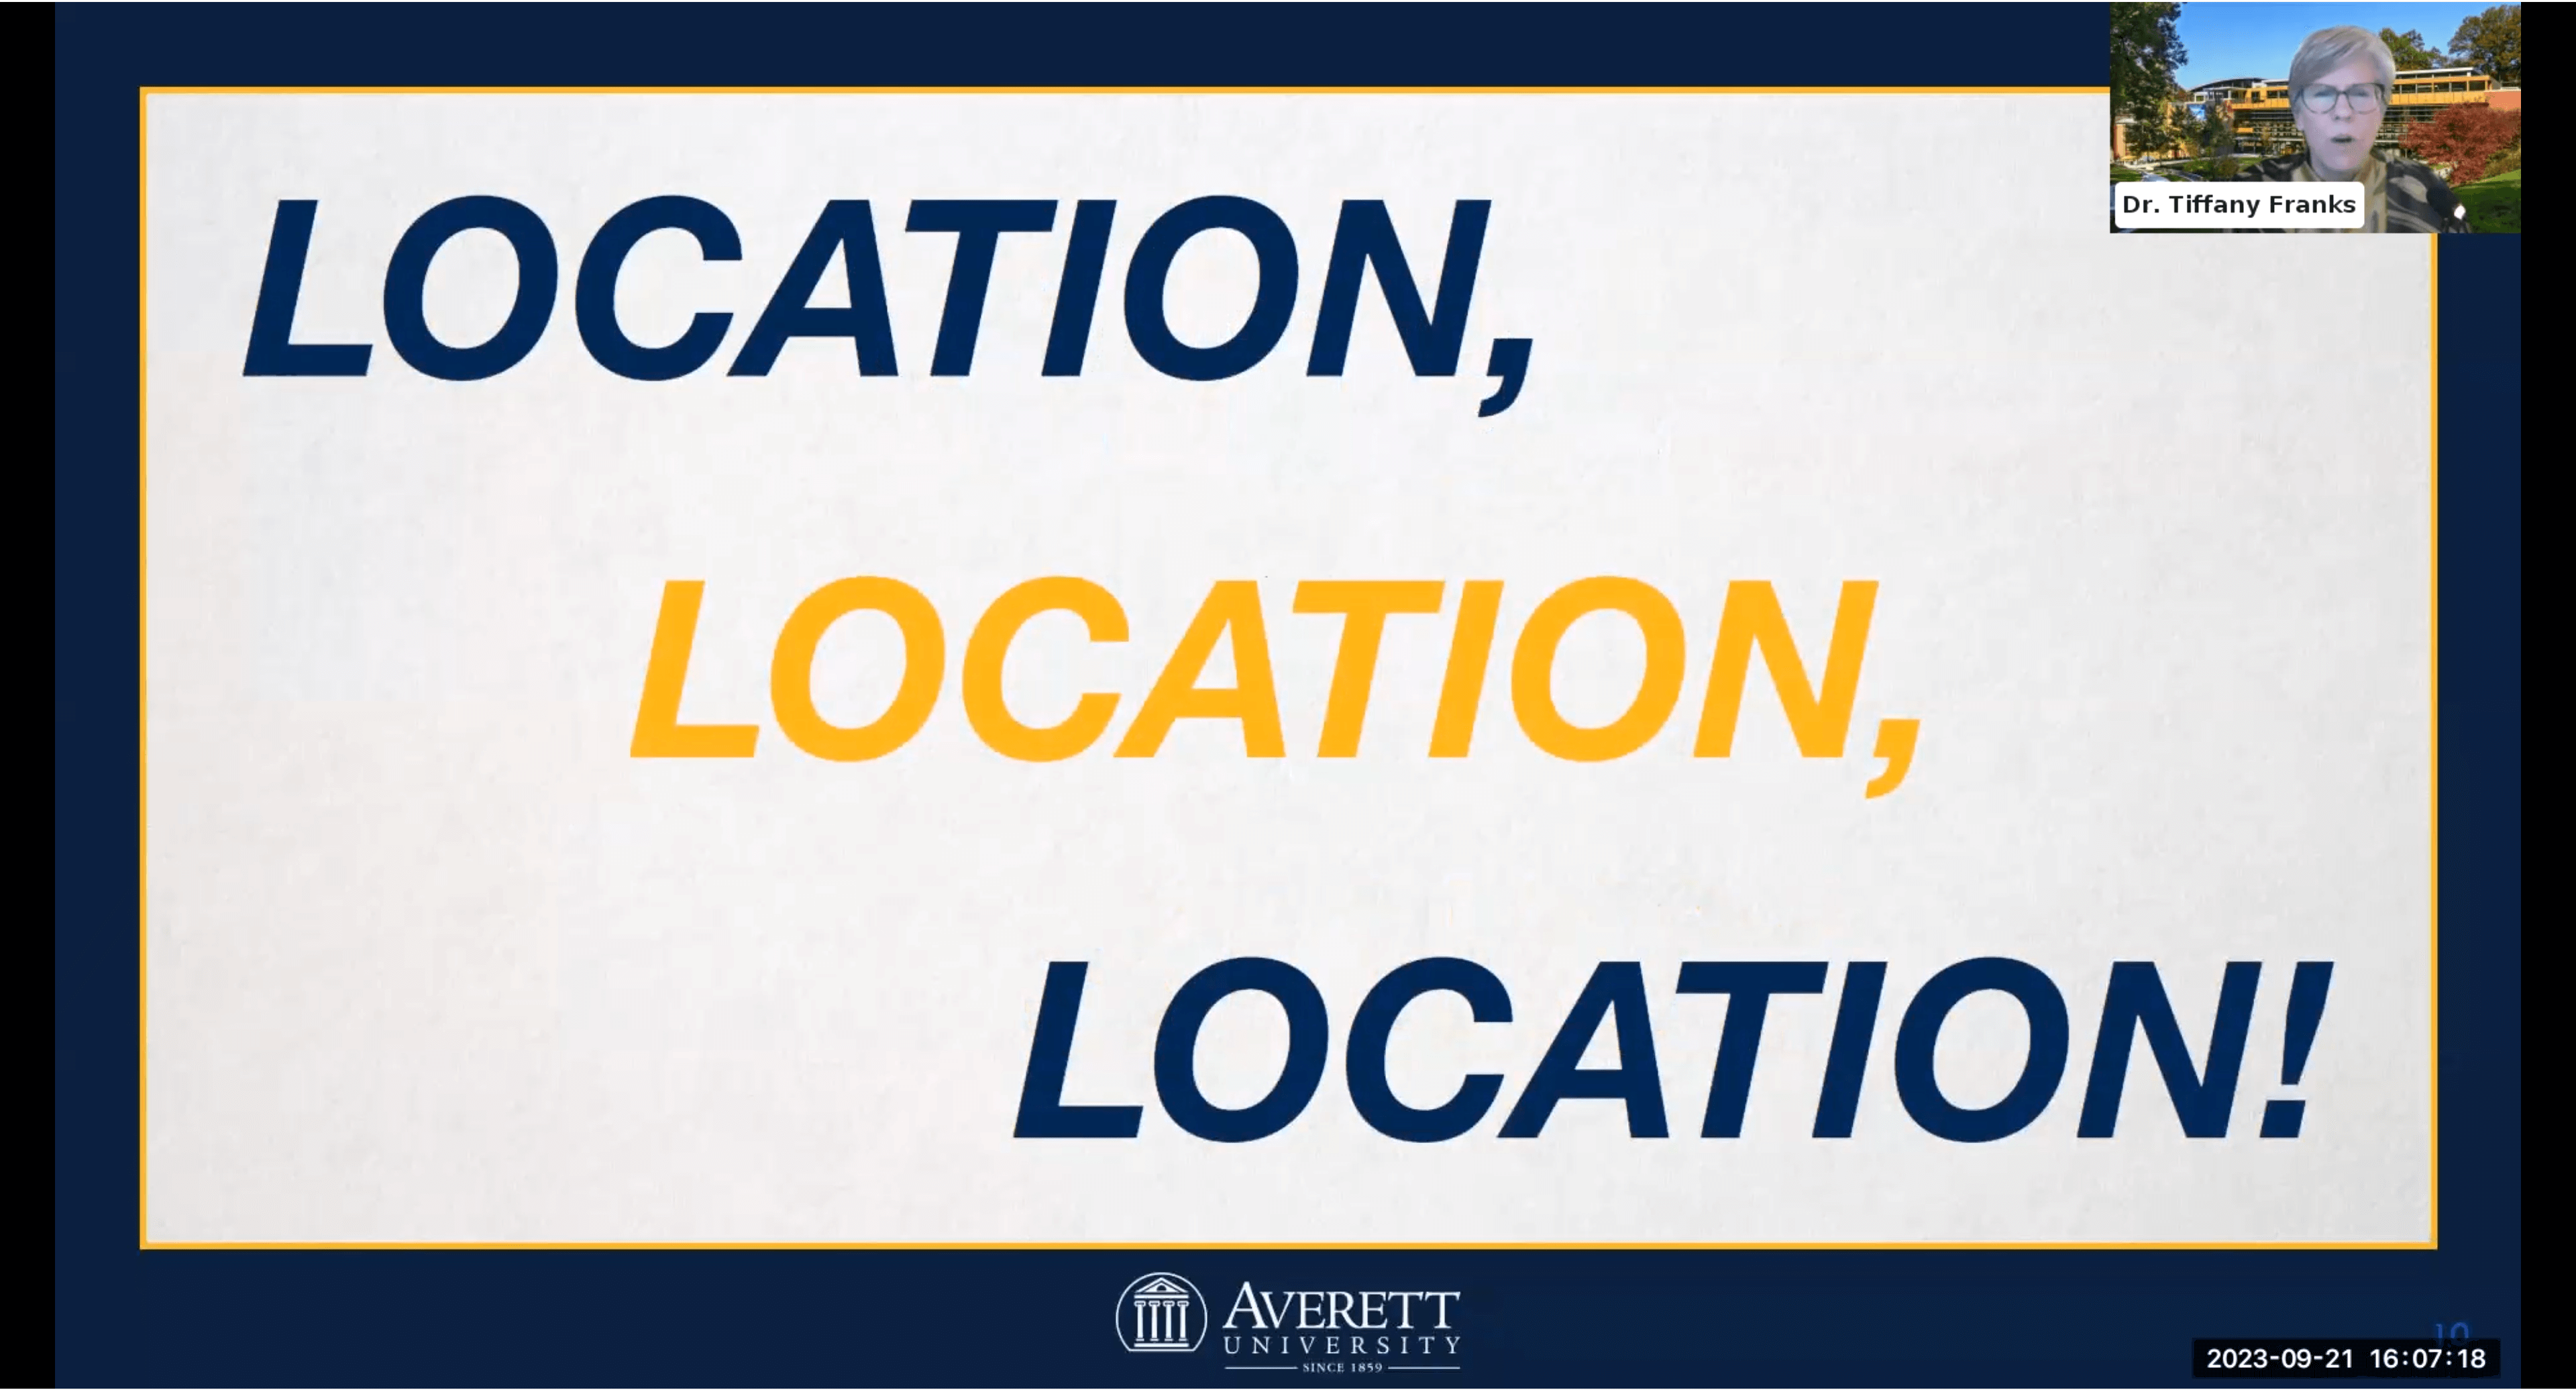 Instructions to write down desired and undesired locations for consideration.